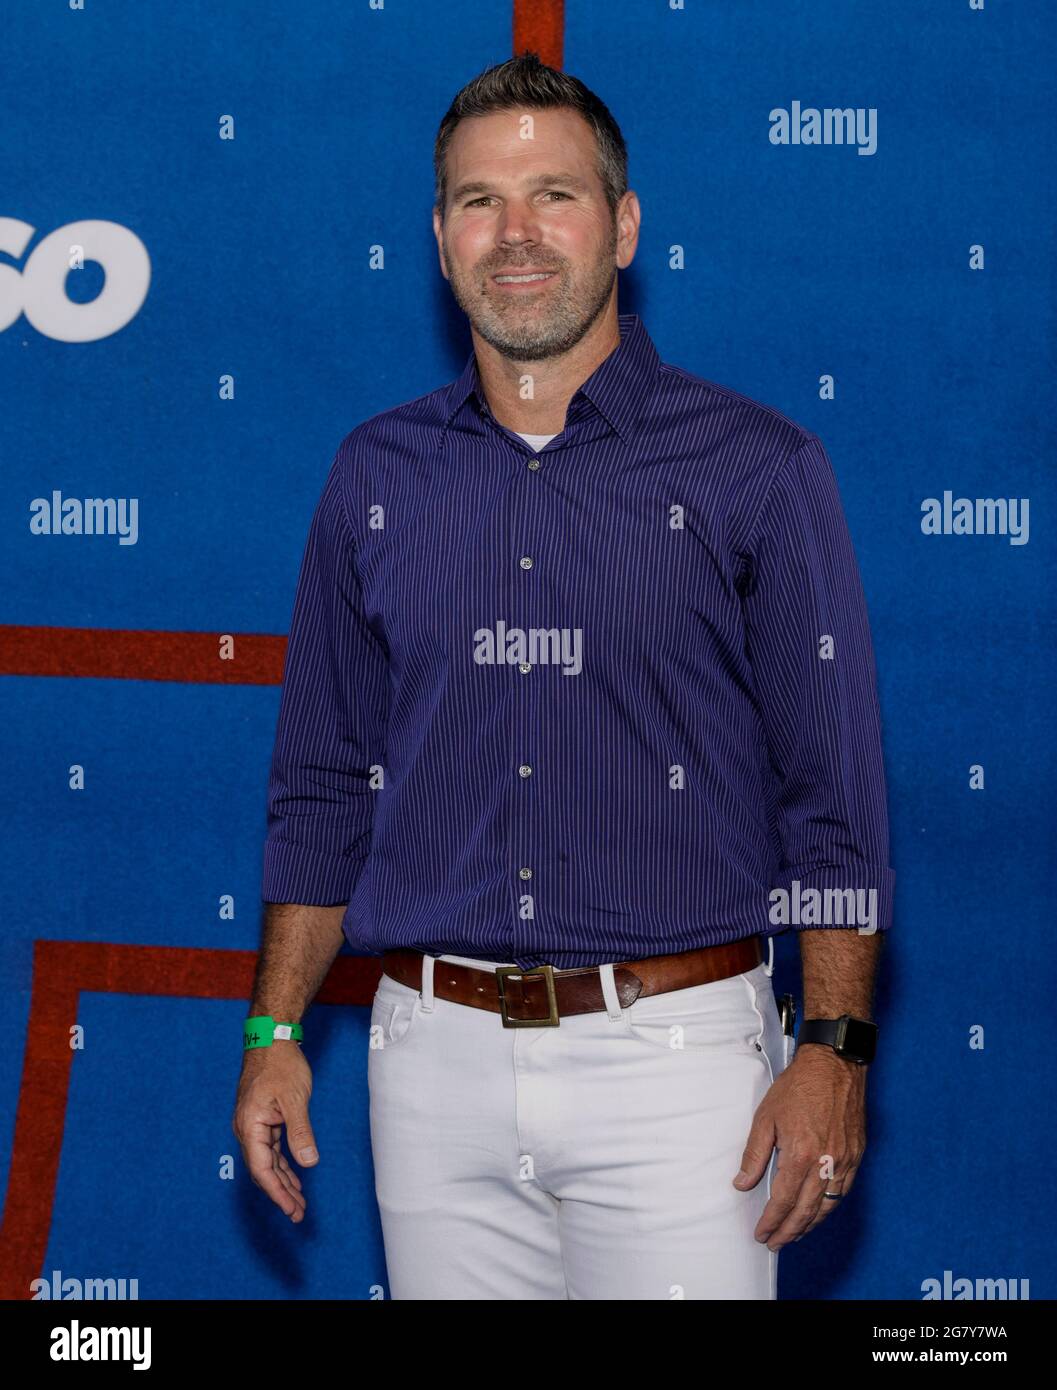 WEST HOLLYWOOD, CALIFORNIA - JULY 15, 2021: US former soccer player and LA Galaxy Greg Vanney (C) attends Apple's 'Ted Lasso' Season 2 Premiere at Pac Stock Photo